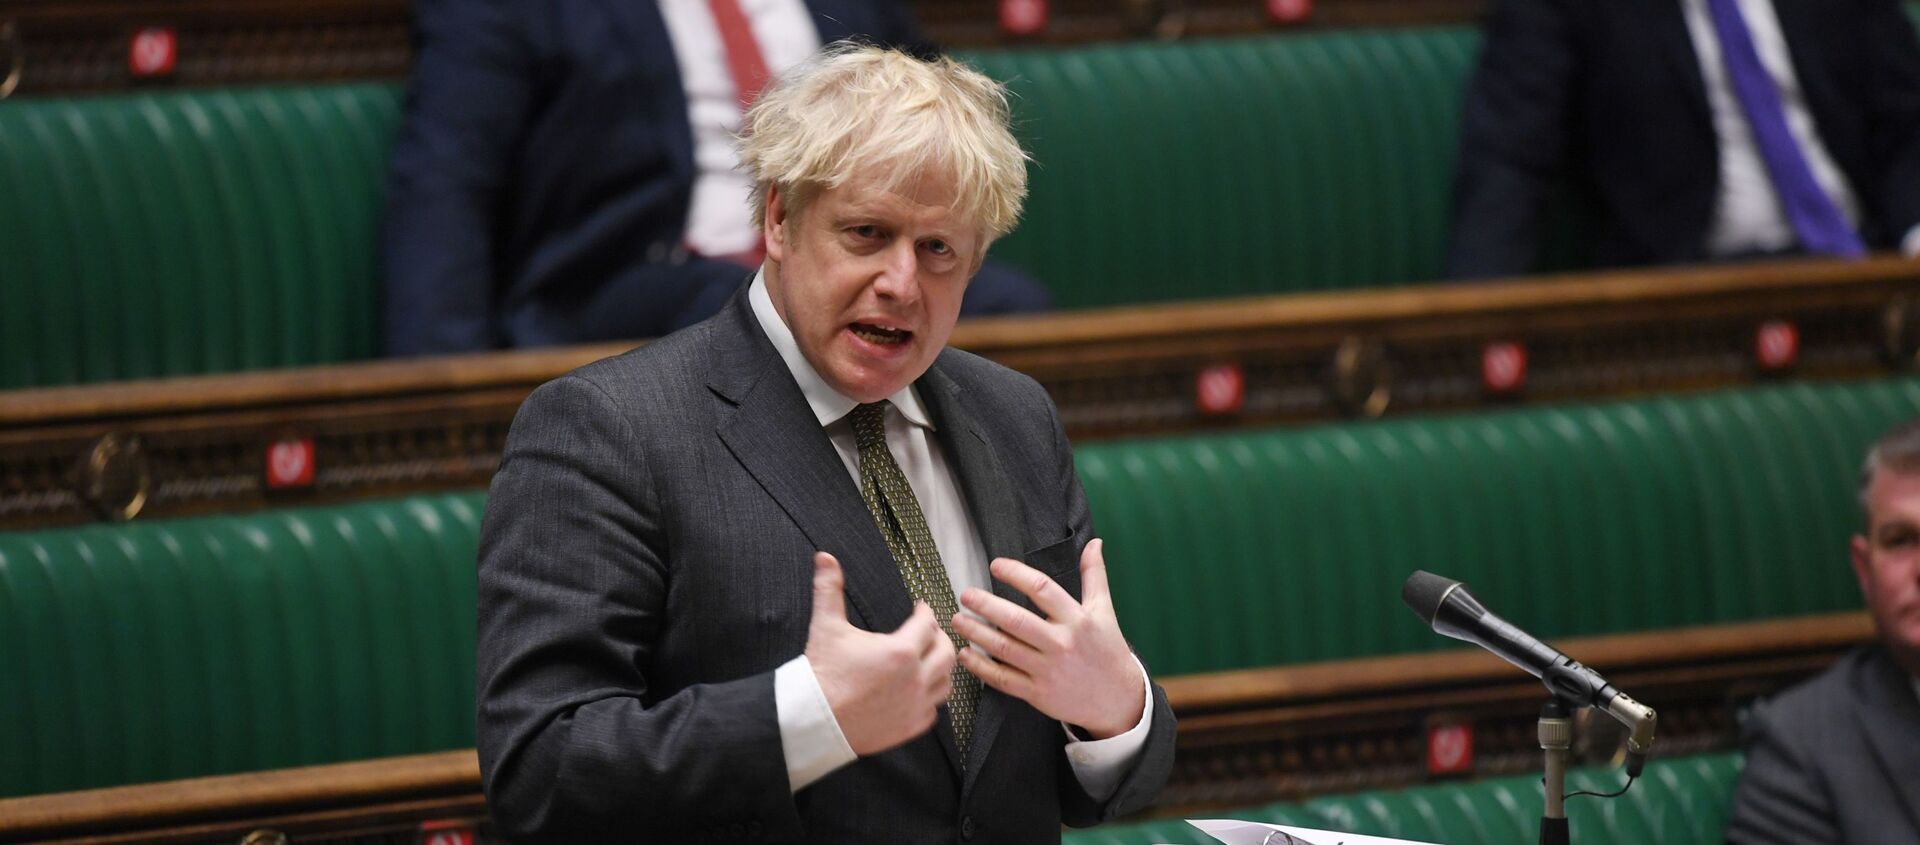 A handout photograph released by the UK Parliament shows Britain's Prime Minister Boris Johnson speaking during Prime Minister's Questions (PMQs) in the House of Commons, in central London on December 9, 2020. - Sputnik International, 1920, 27.12.2020